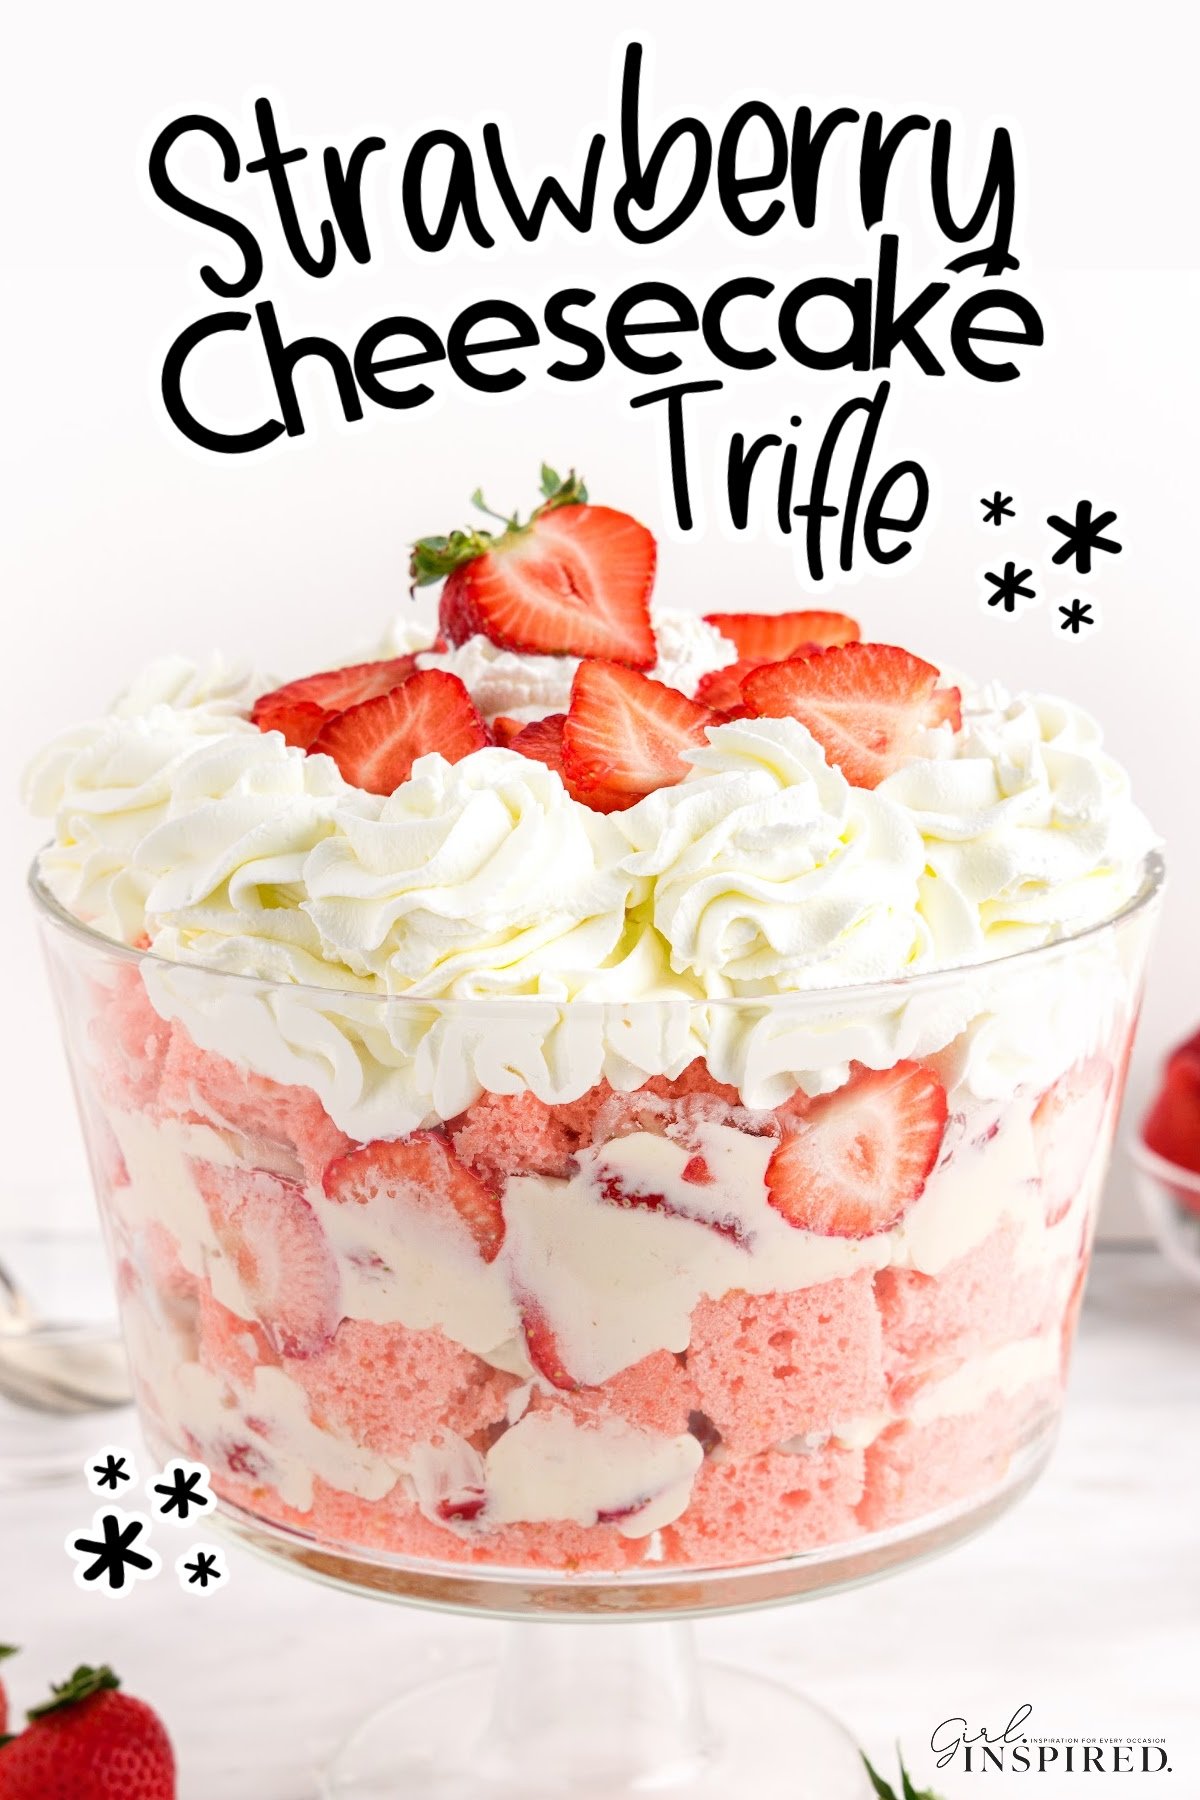 Layers of strawberry cake and whipped cream, fresh strawberries, and text title "Strawberry Cheesecake Trifle."